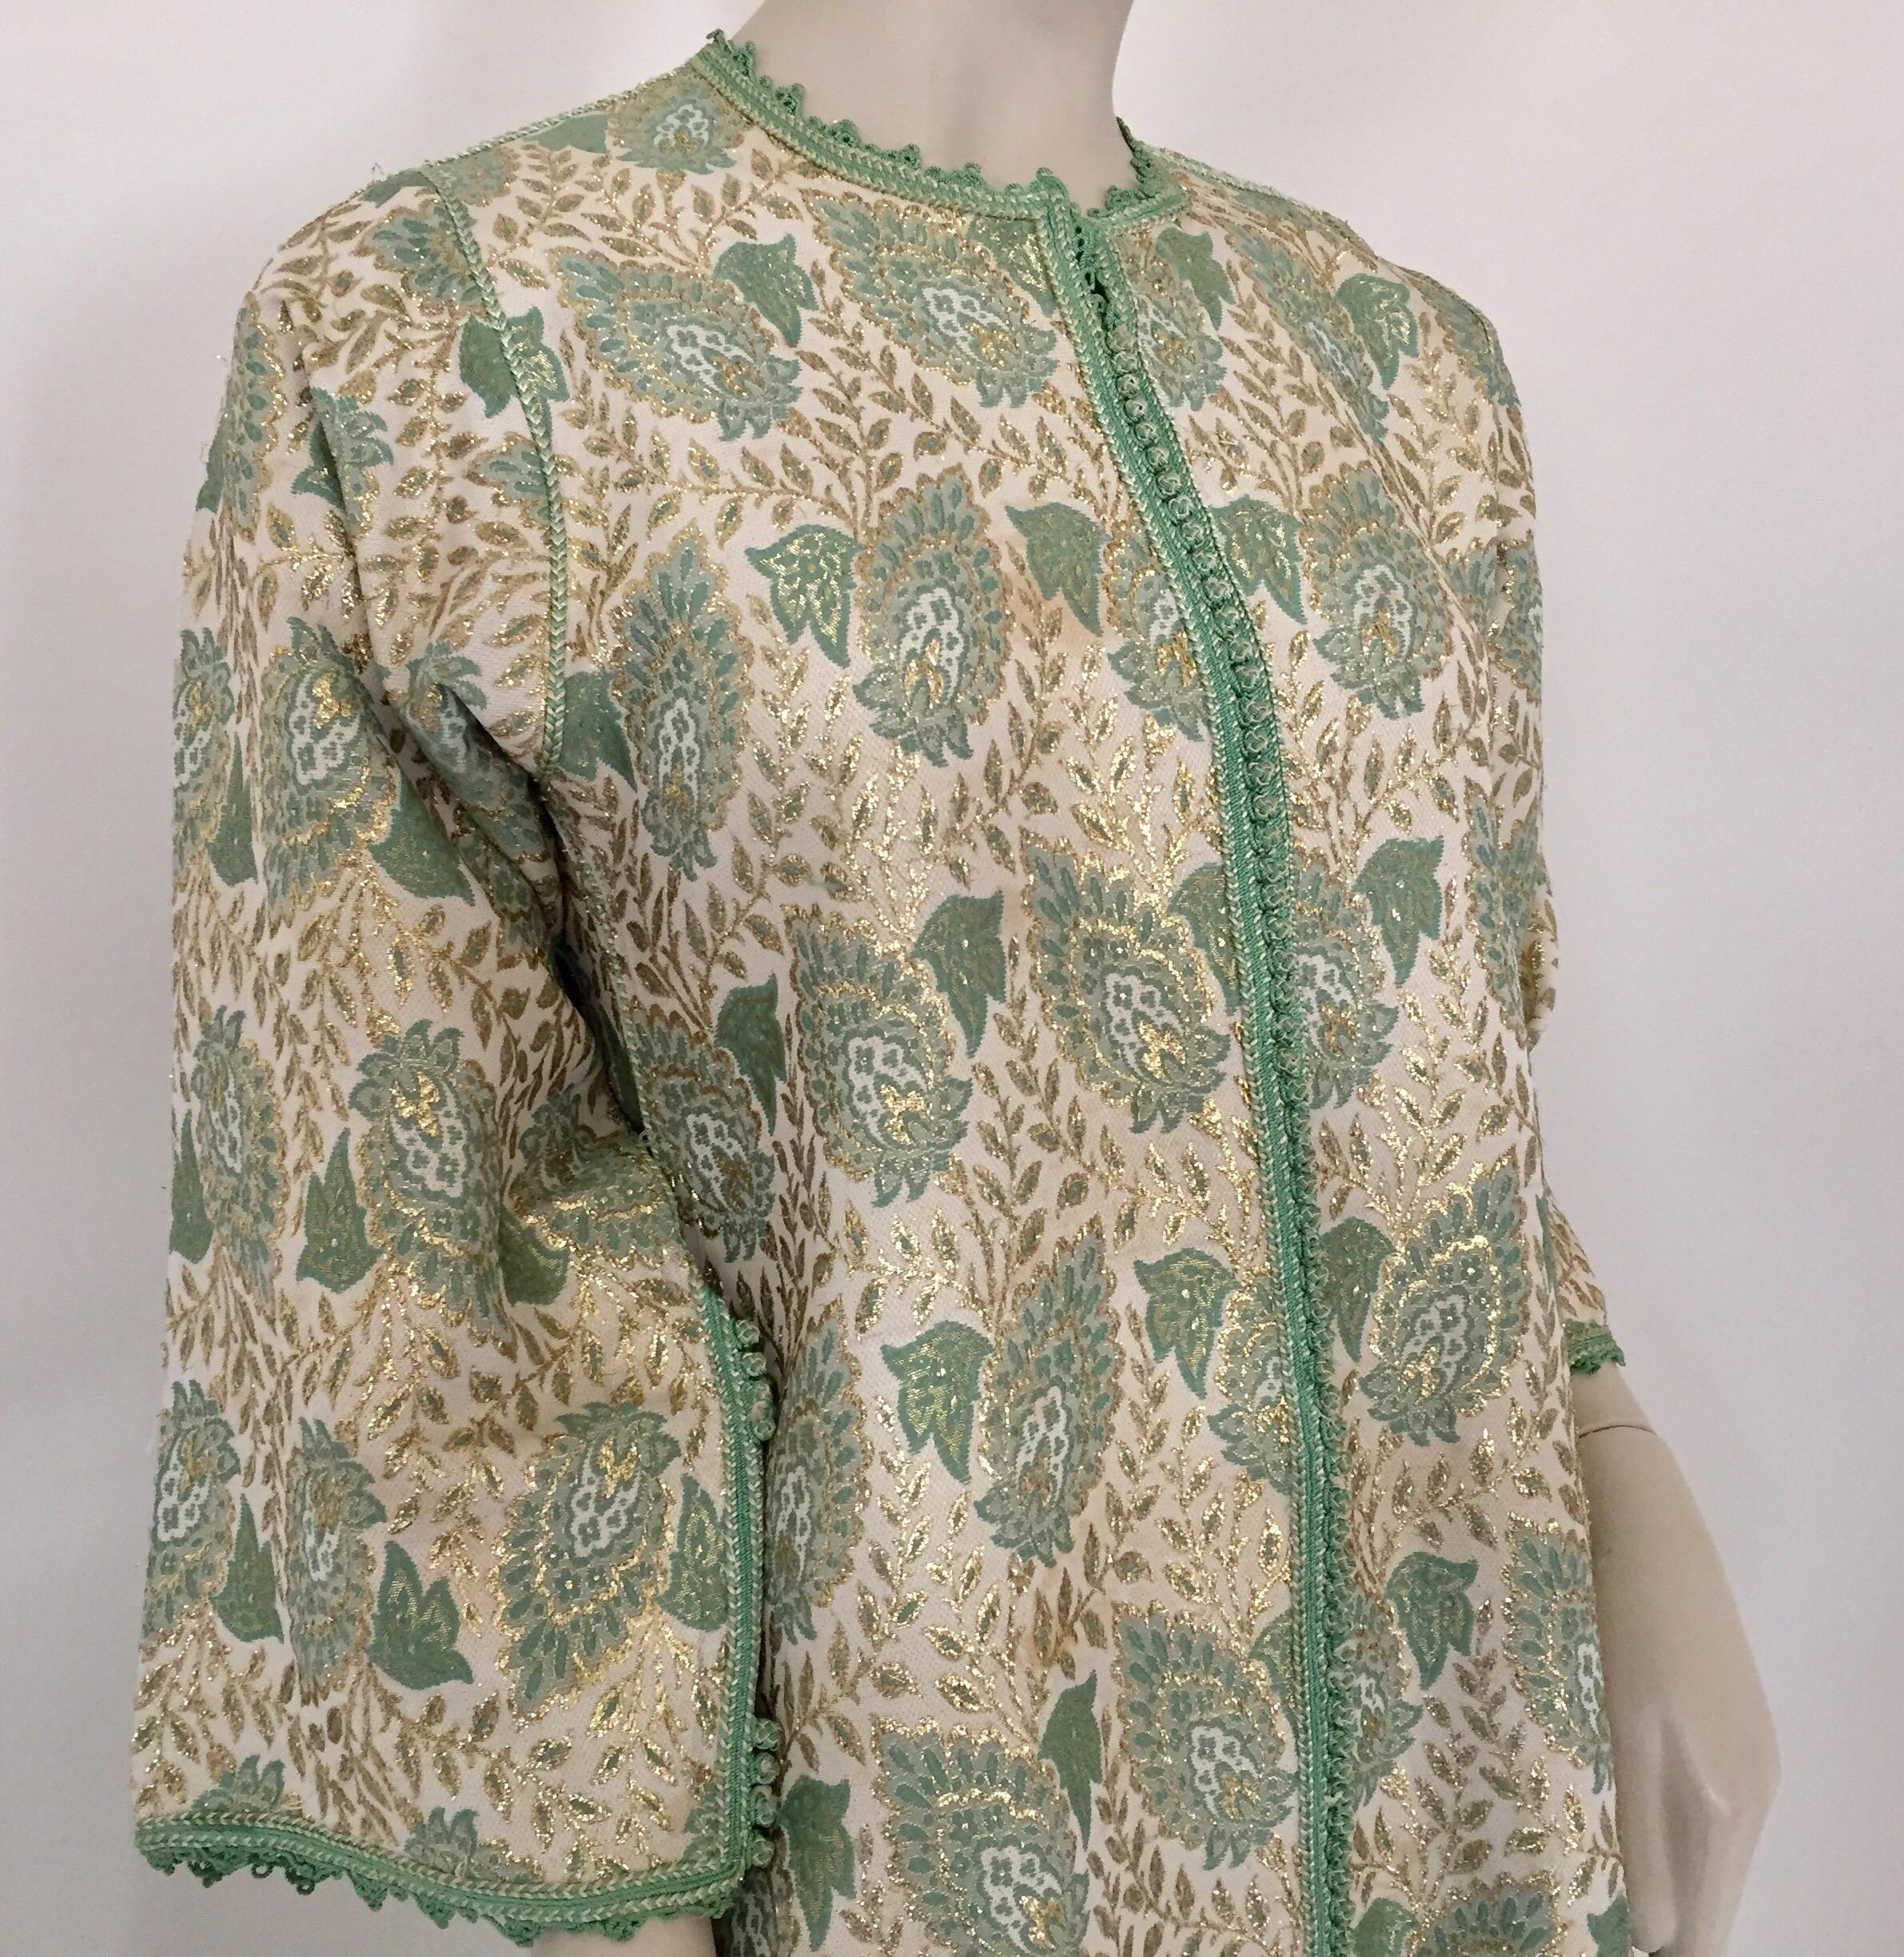 Elegant Moroccan Caftan Green and Silver and Gold Metallic Floral Brocade For Sale 3